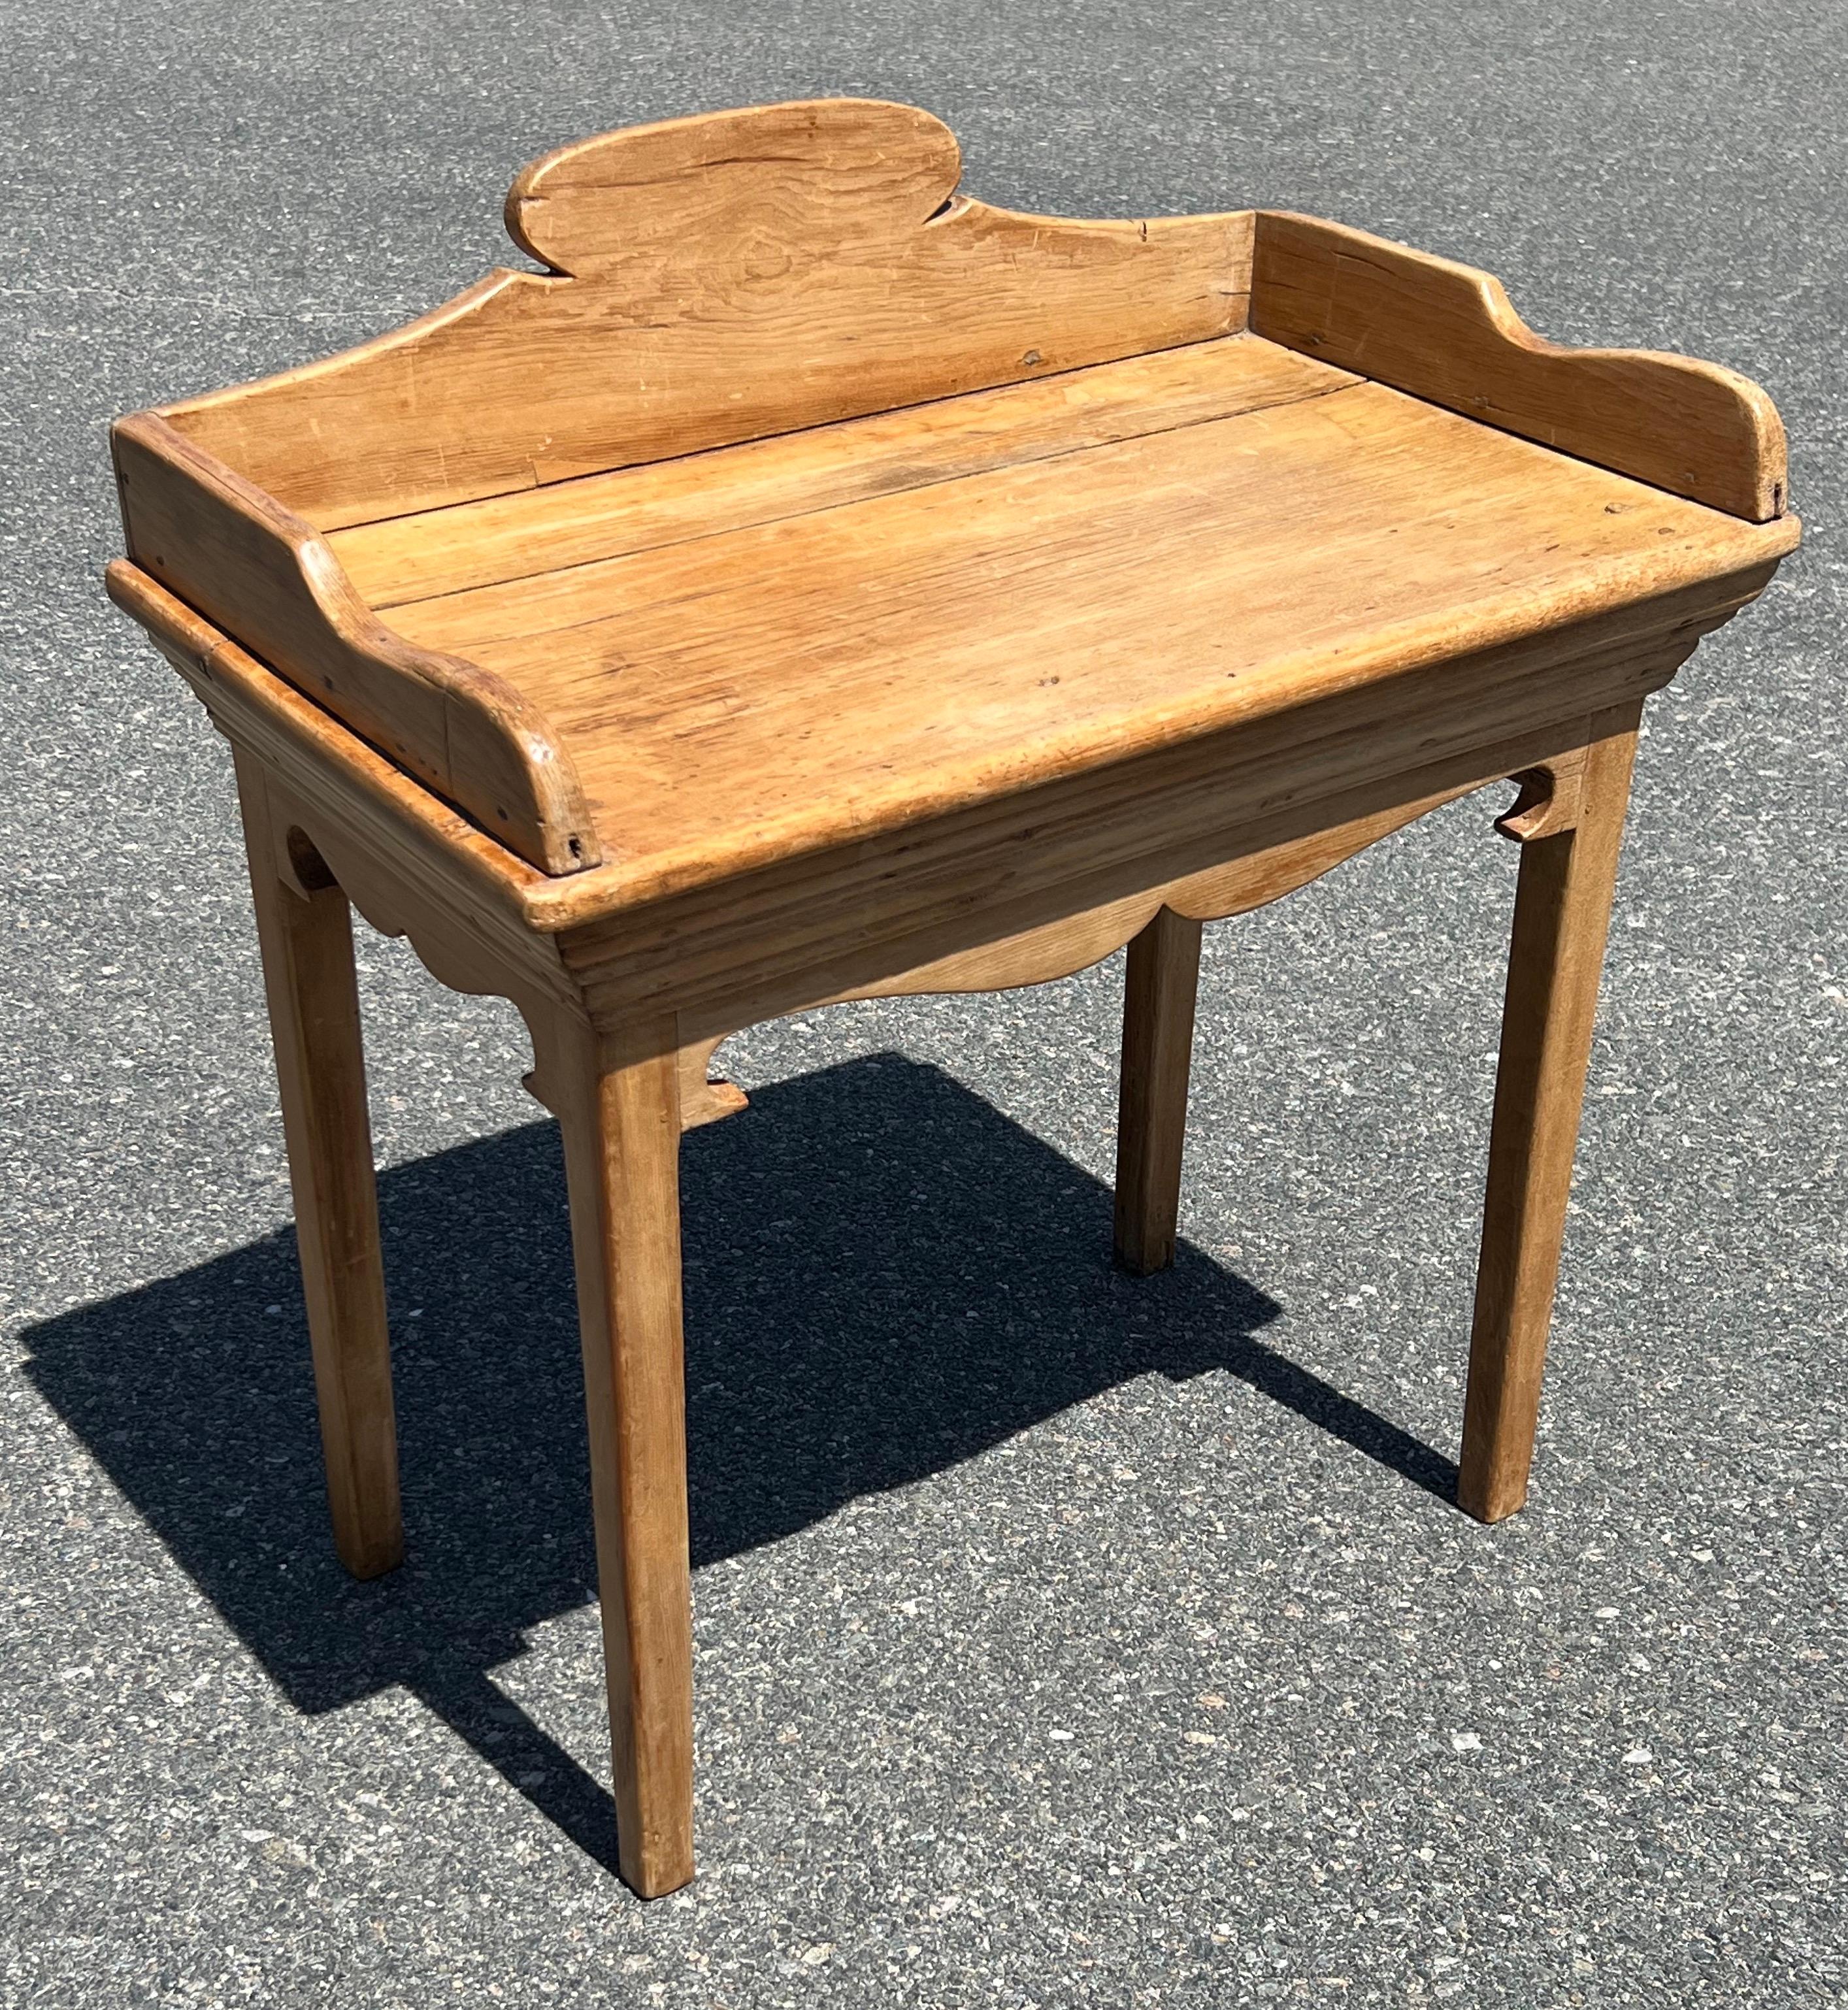 19th century Pine washstand with natural pine finish. Beautifully shaped backsplash, stepped molding under top, shaped gallery below. Surface height 26.5 inches.